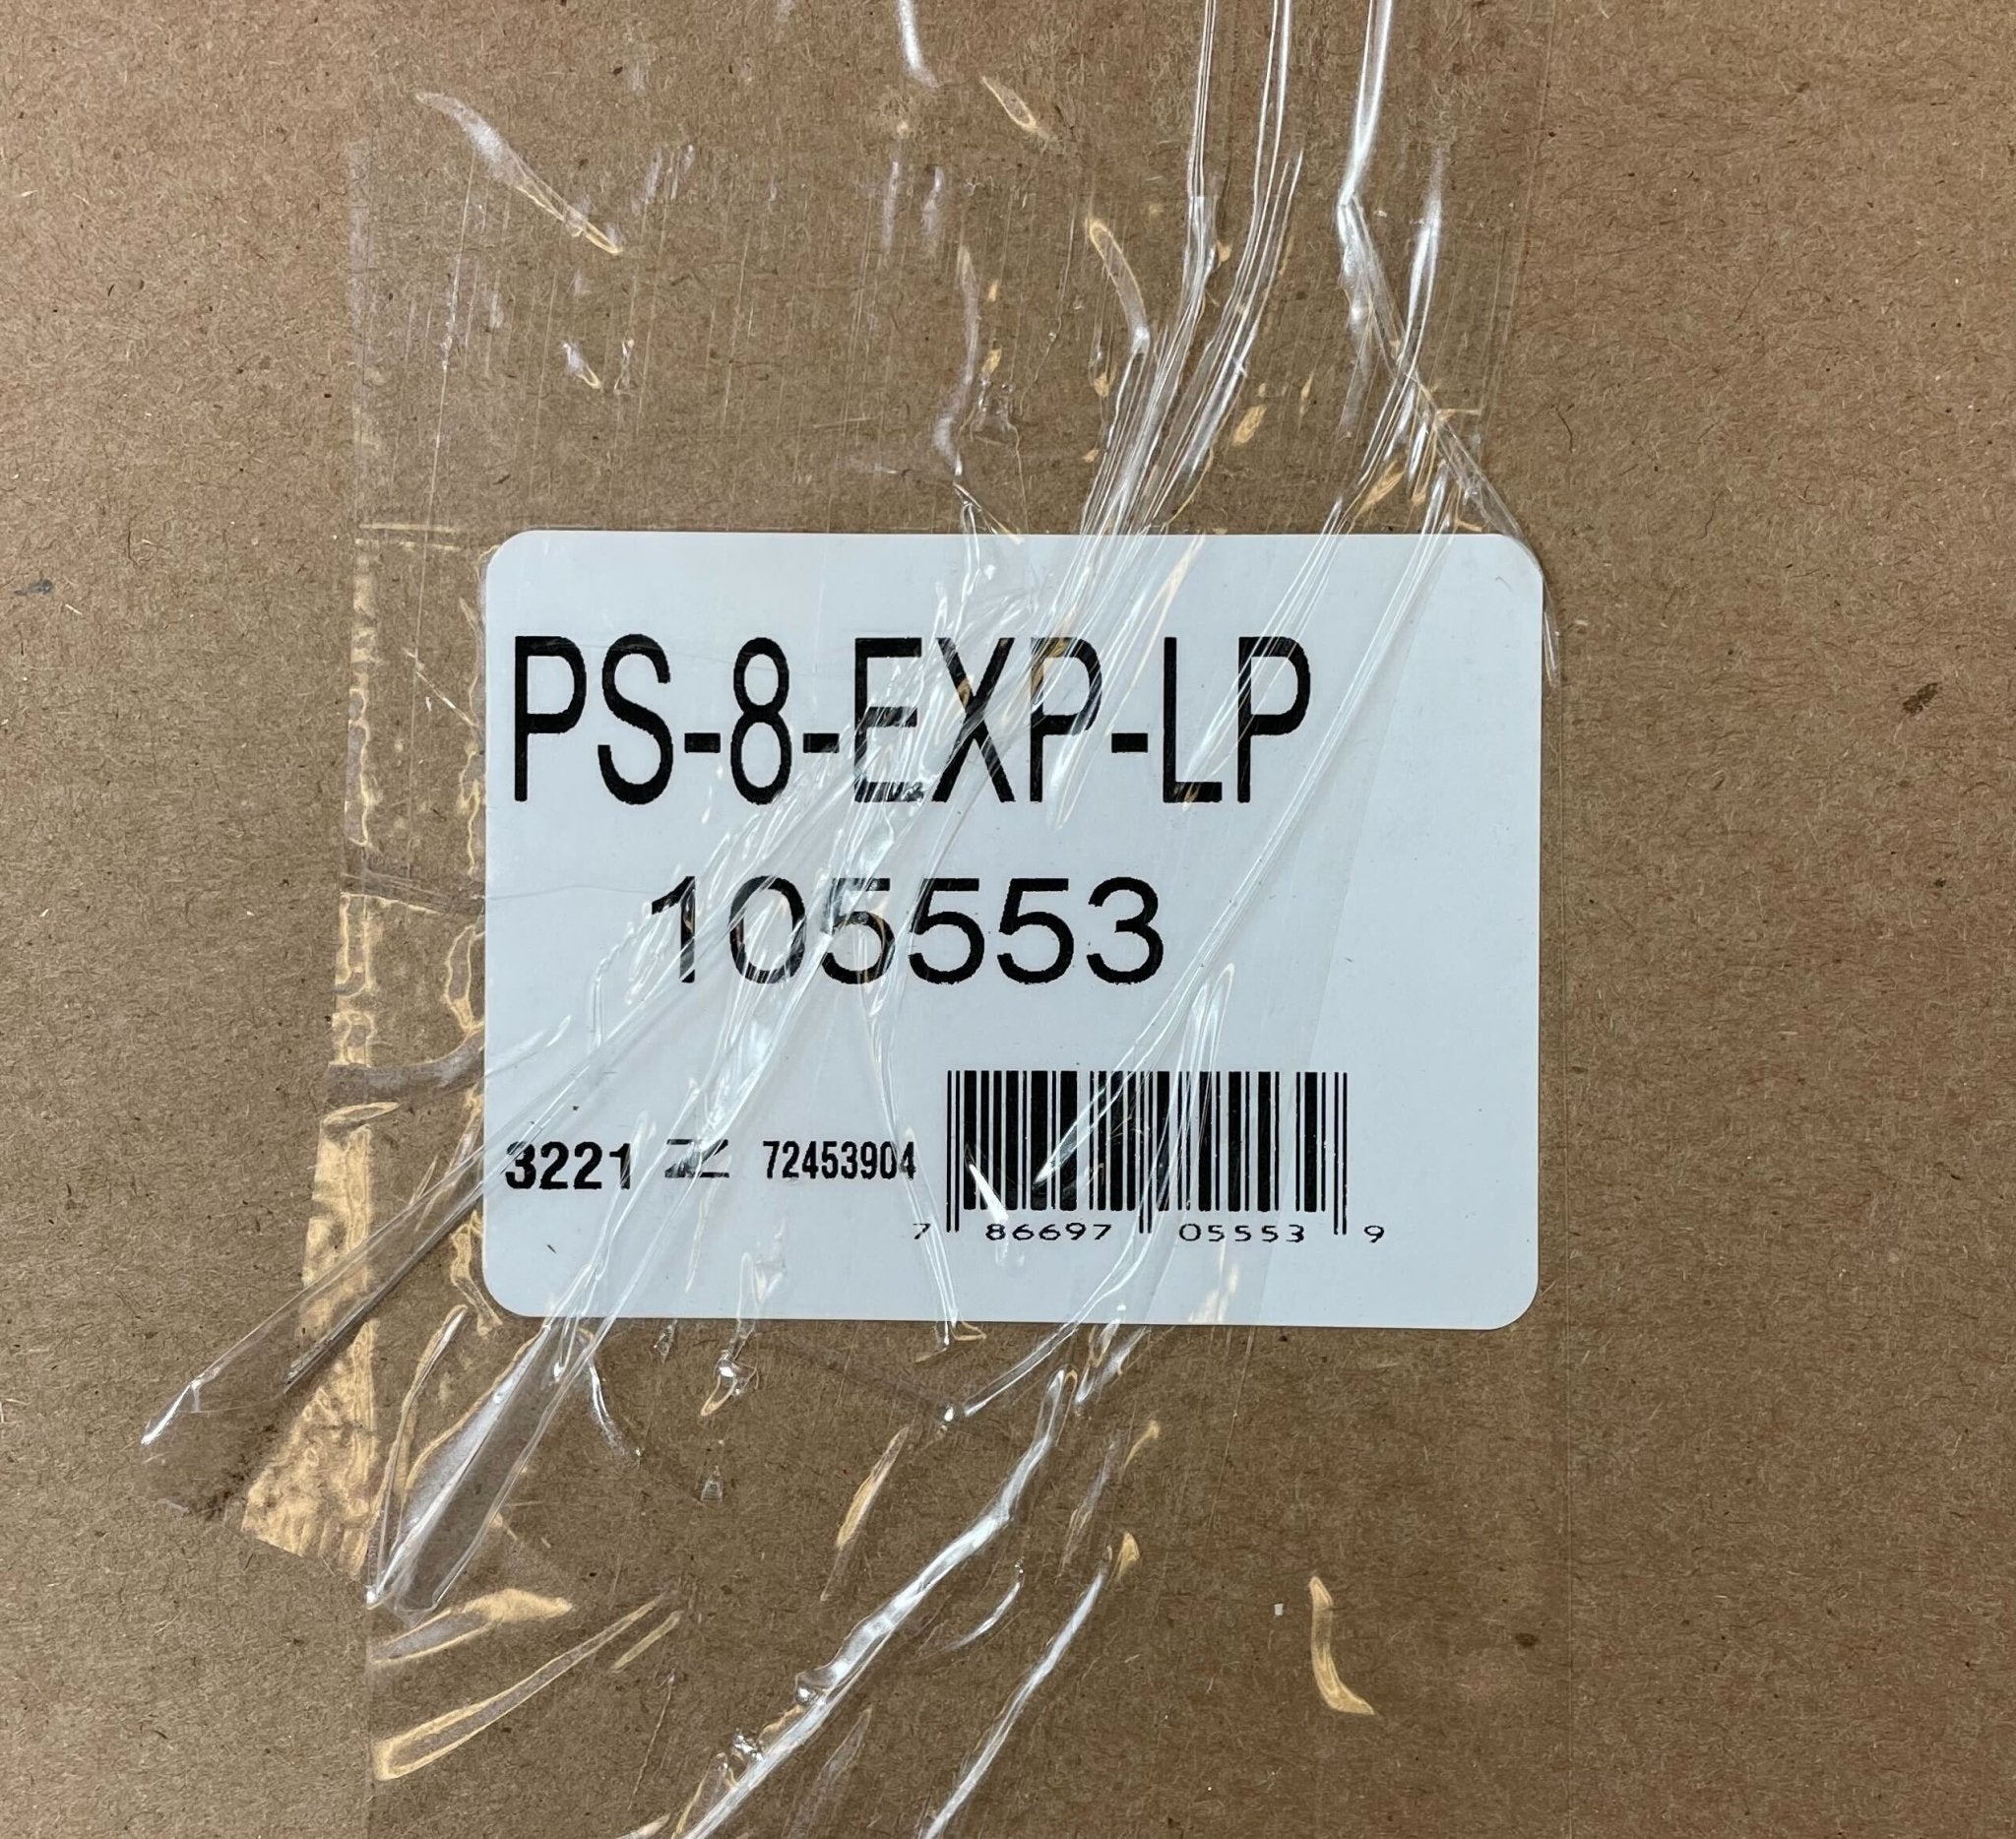 Wheelock PS-8-EXP-LP - The Fire Alarm Supplier